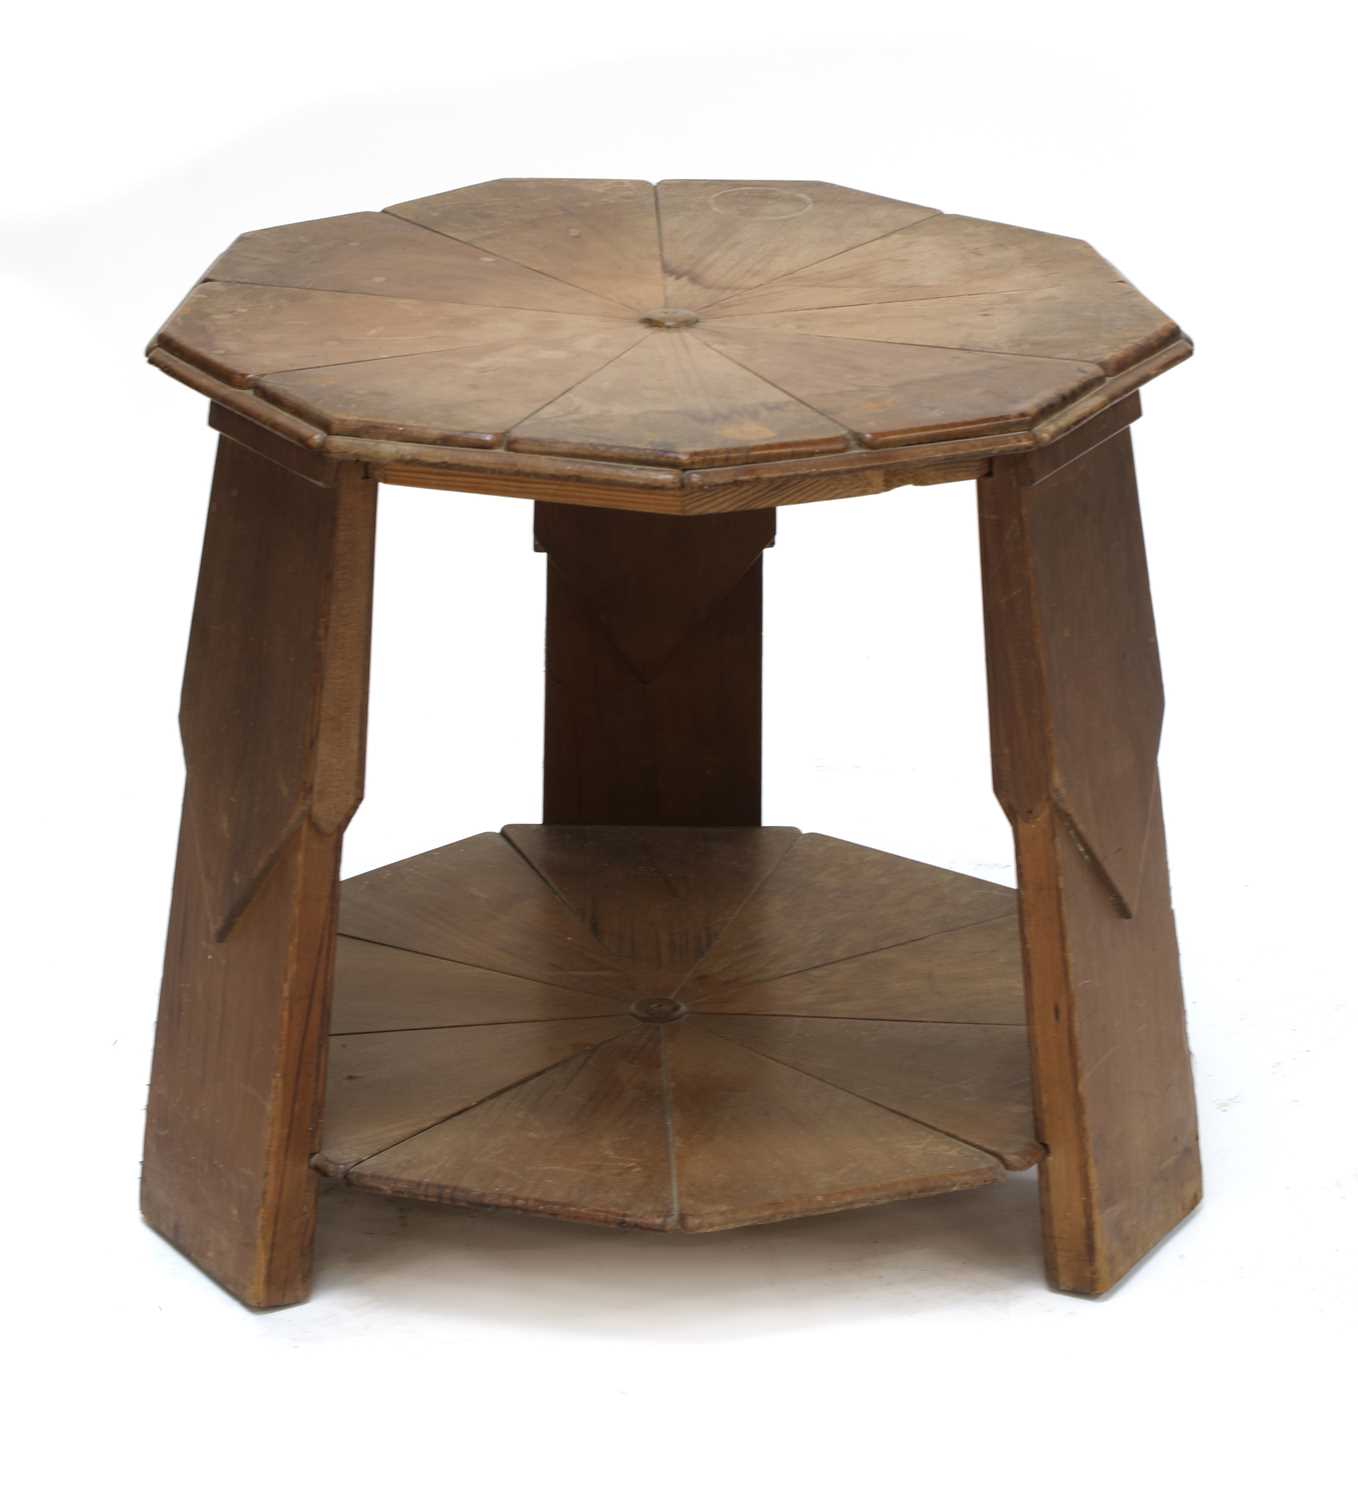 Lot 29 - An unusual Arts and Crafts Baltic pine occasional table